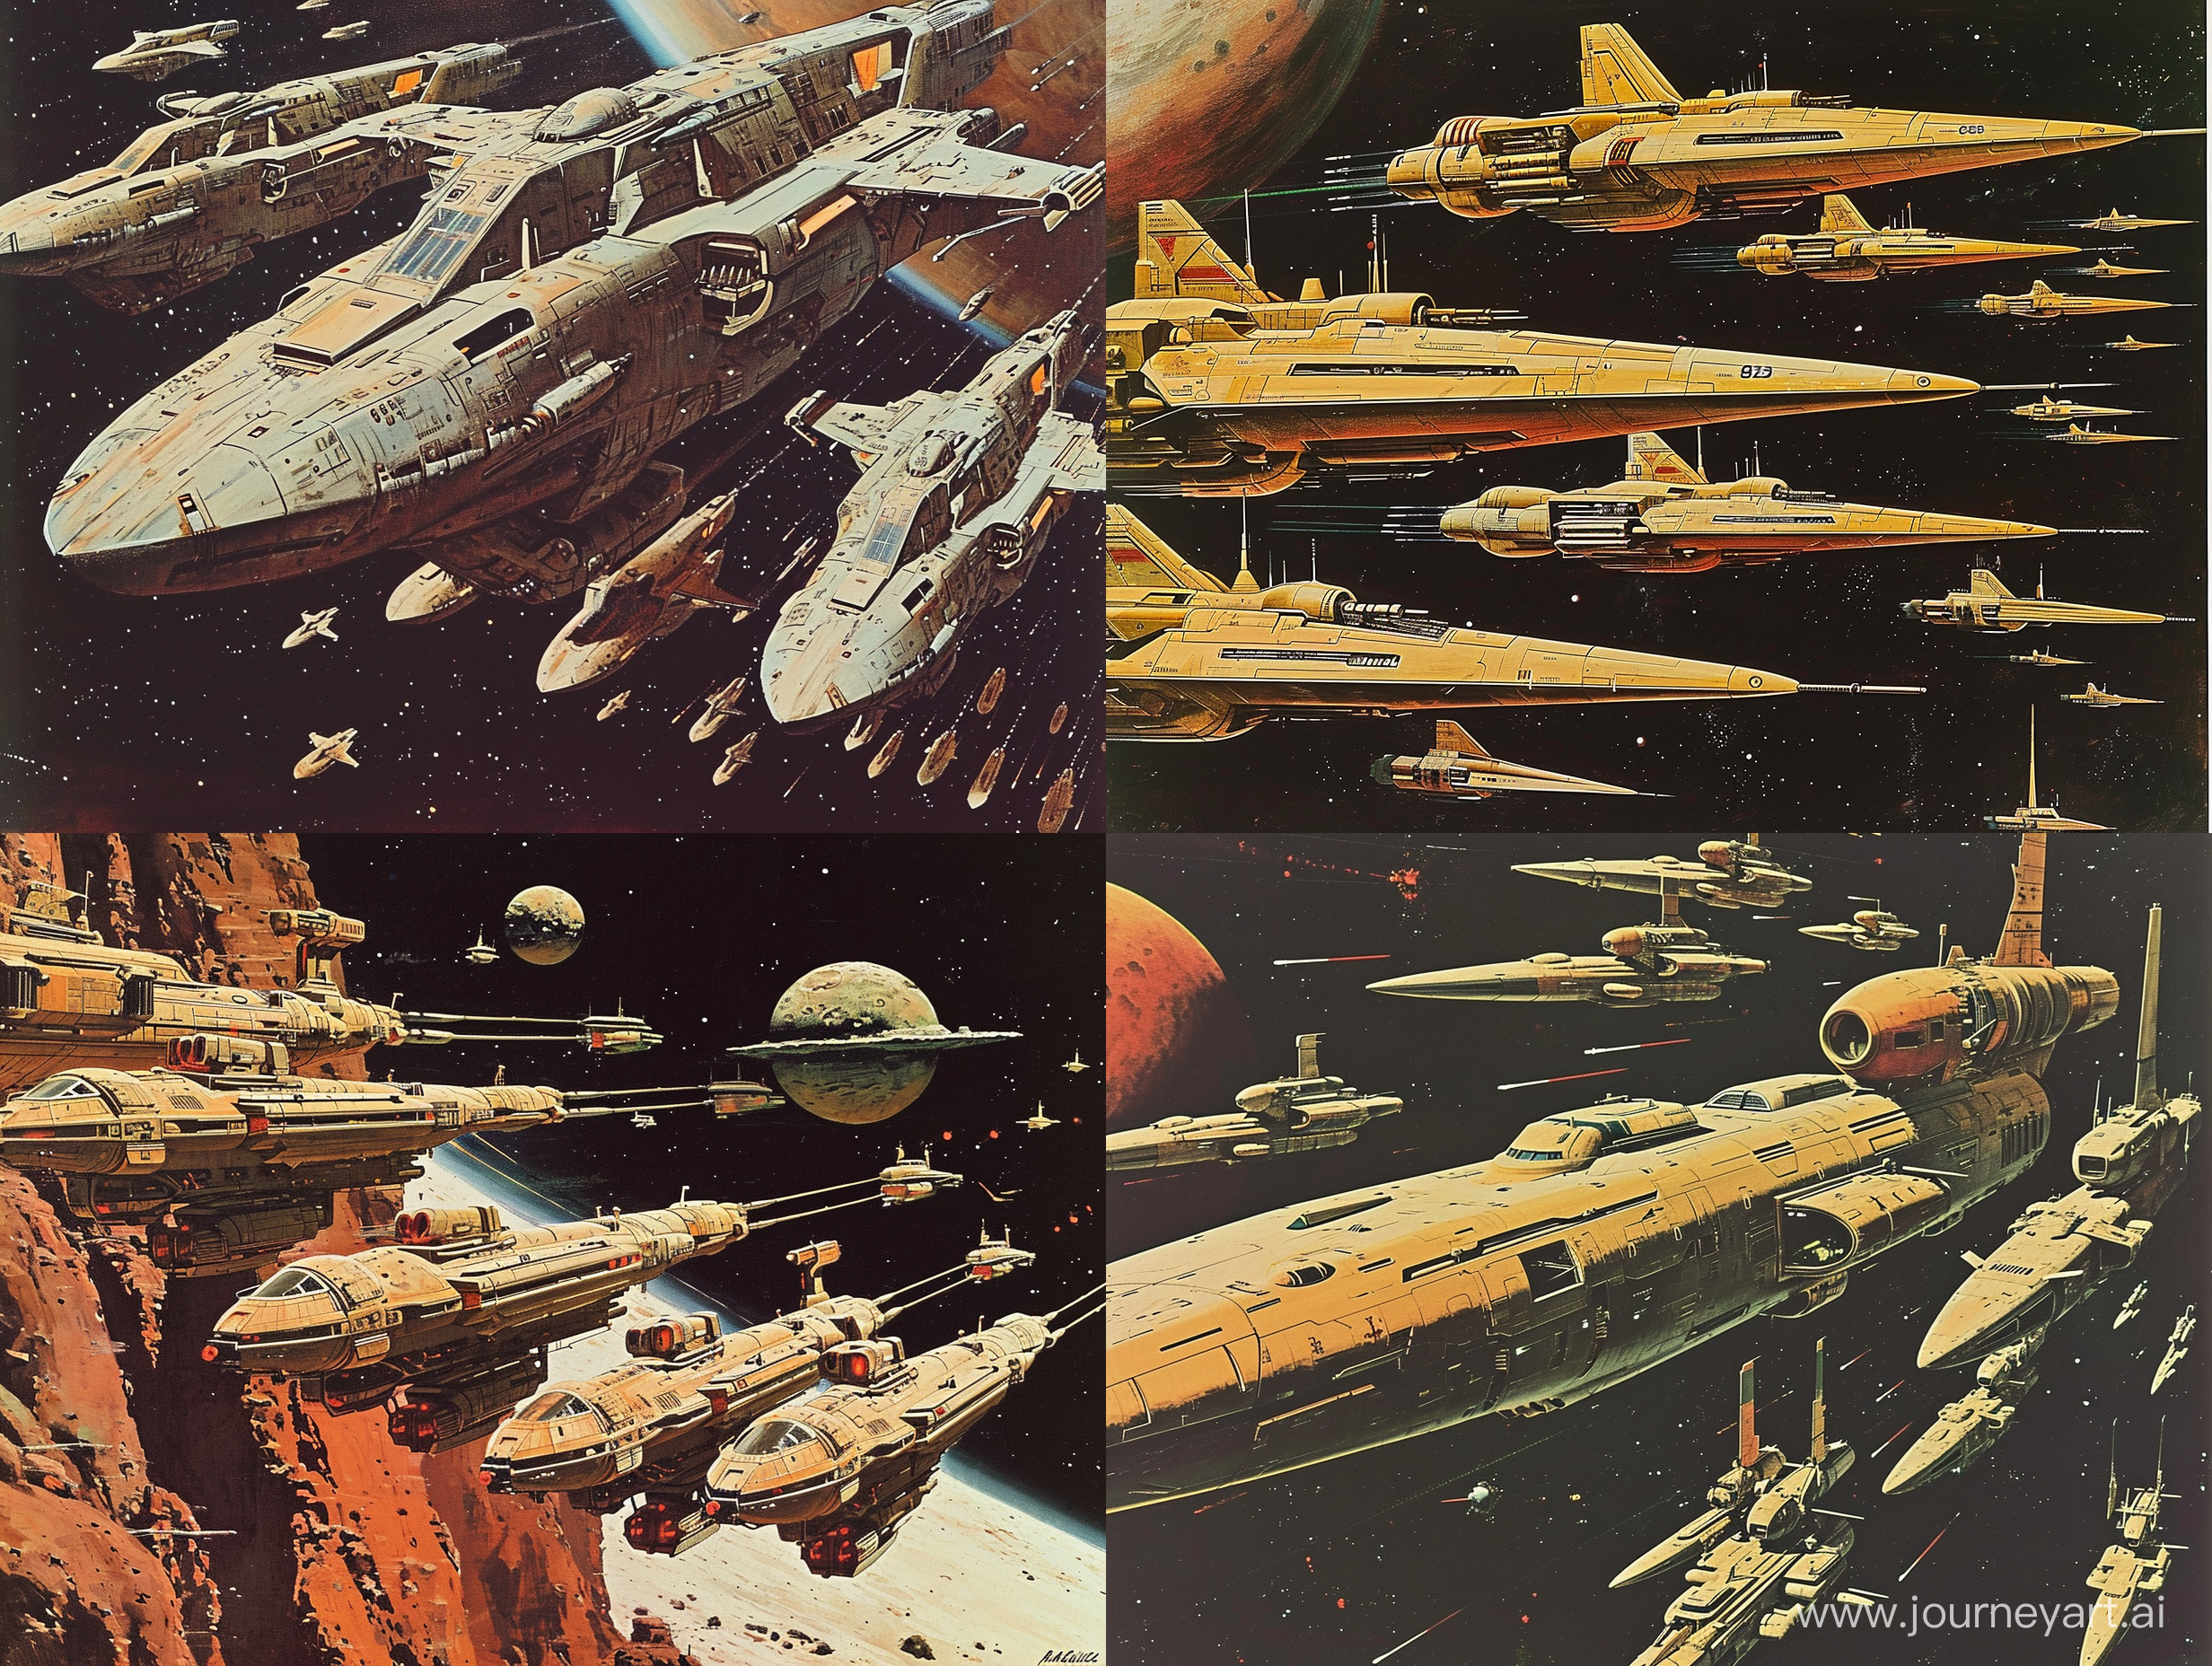 A fleet of long threatening detailed military spaceships in outer space drawn by Ralph McQuarrie. 1977. retro science fiction art. in color.